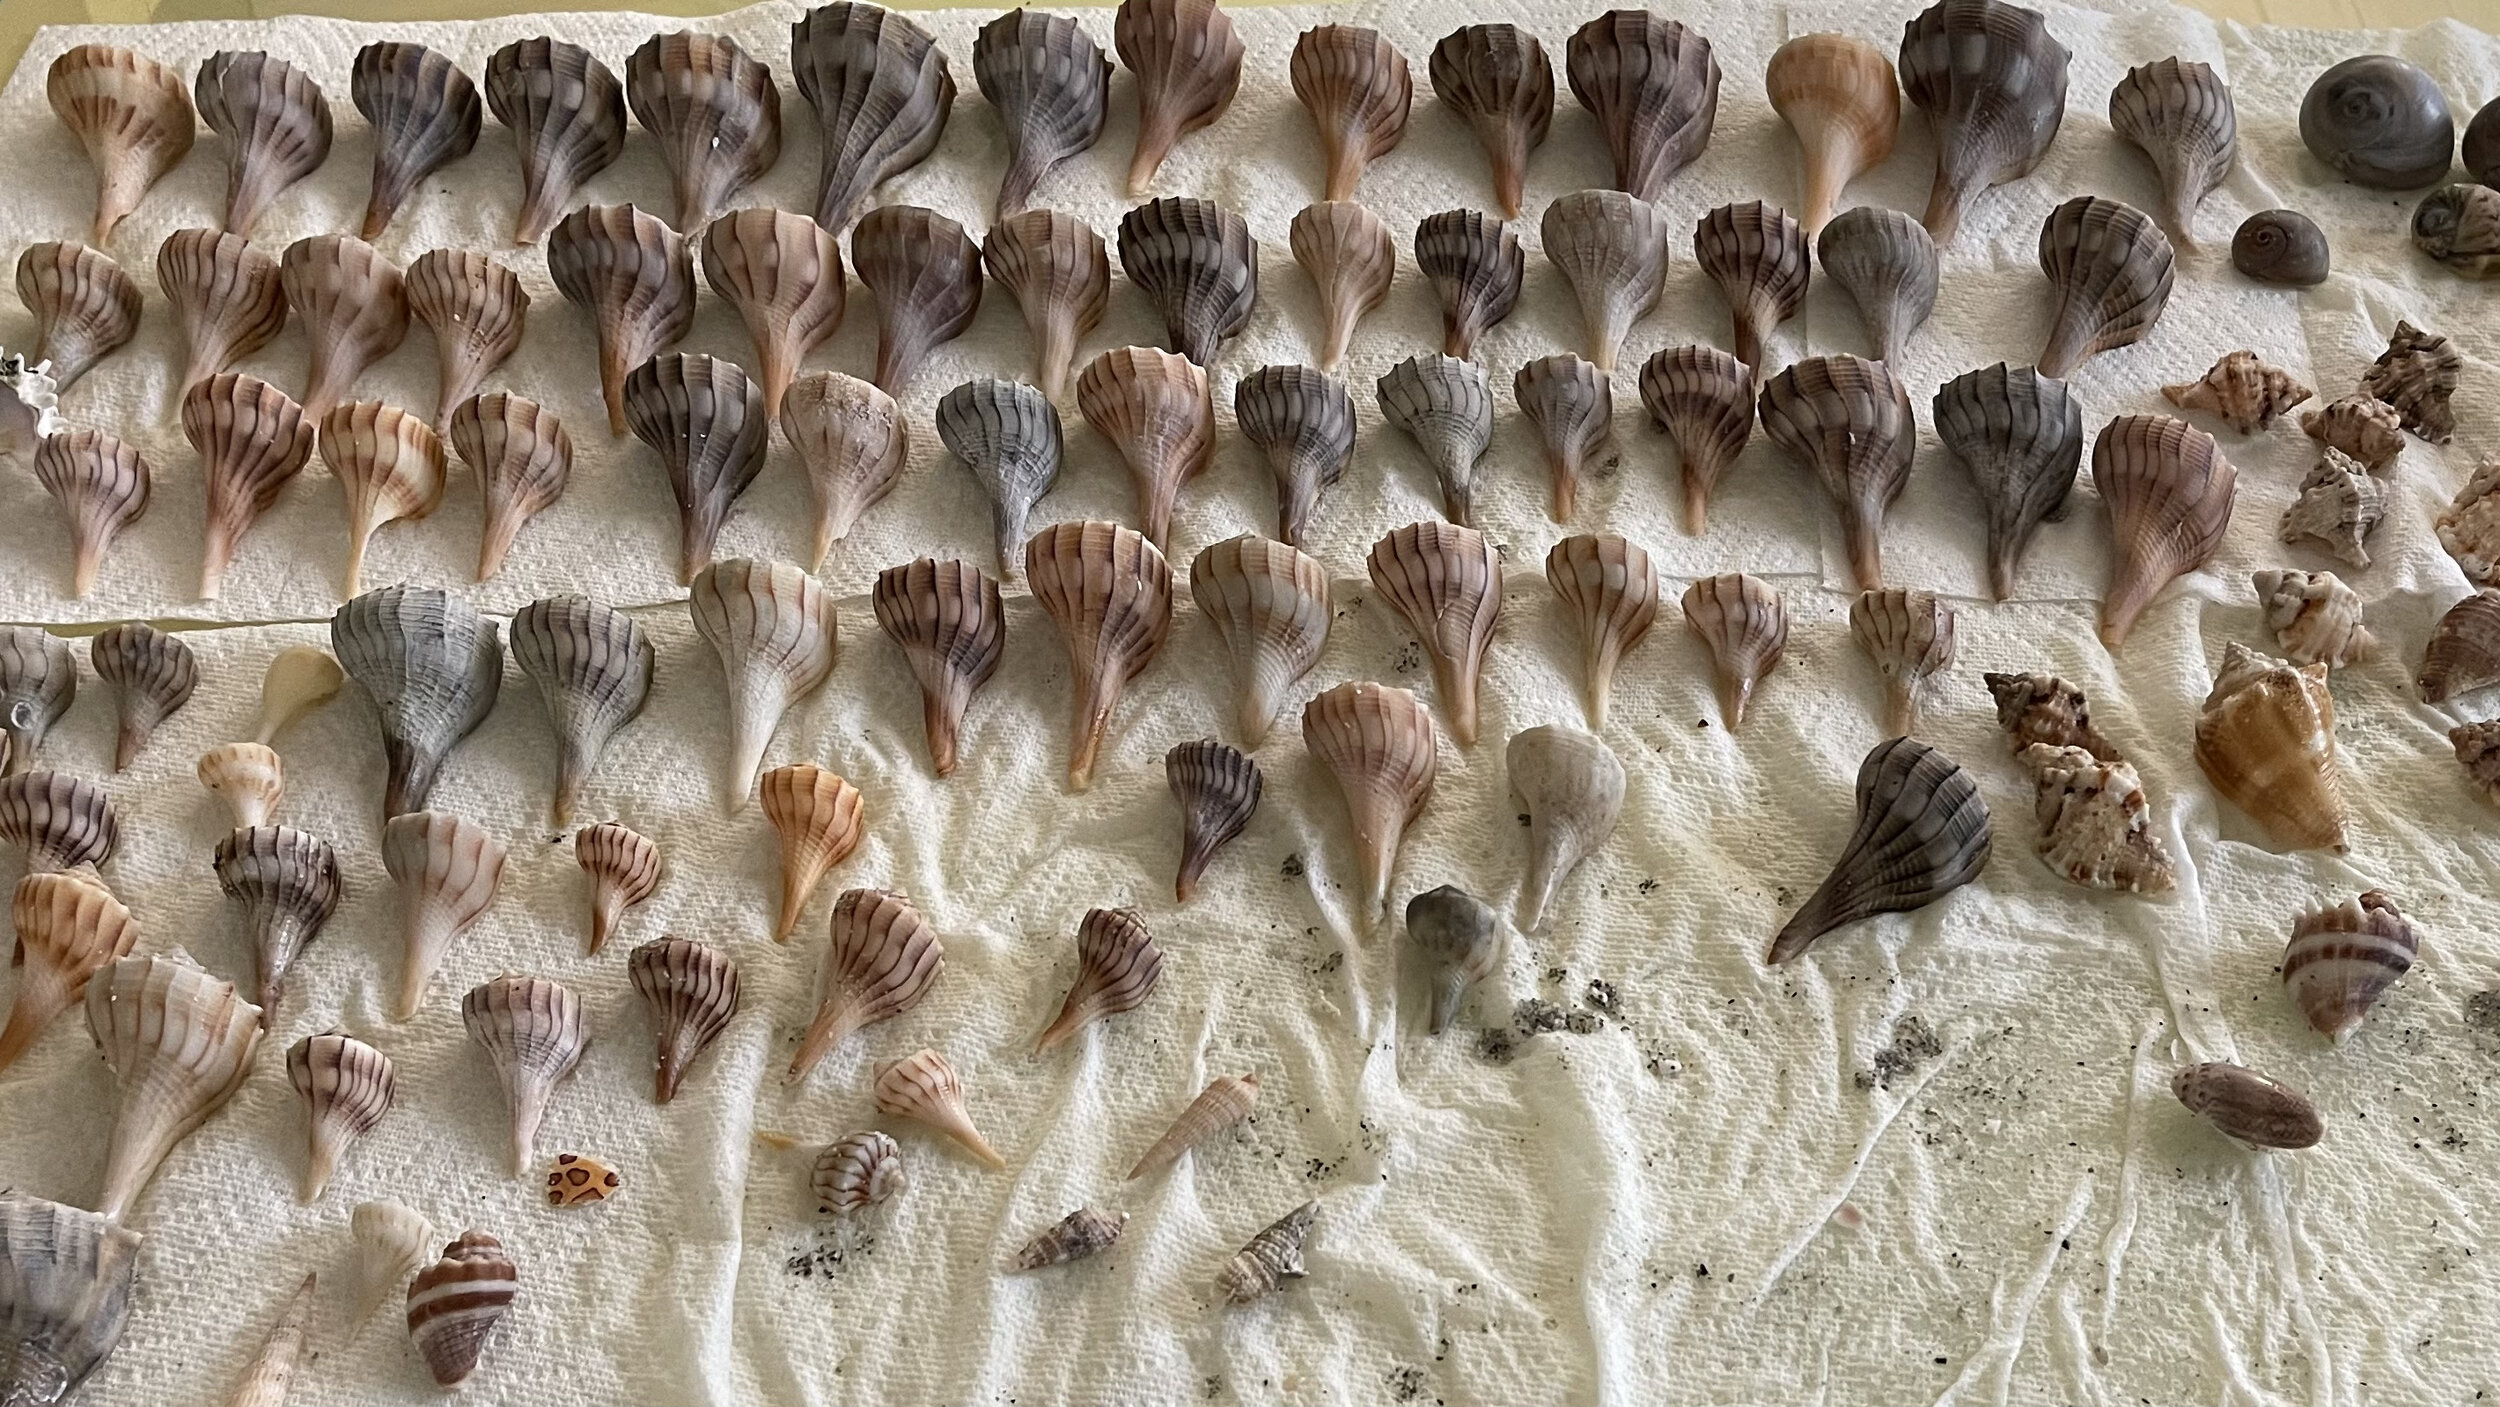 A good day shelling